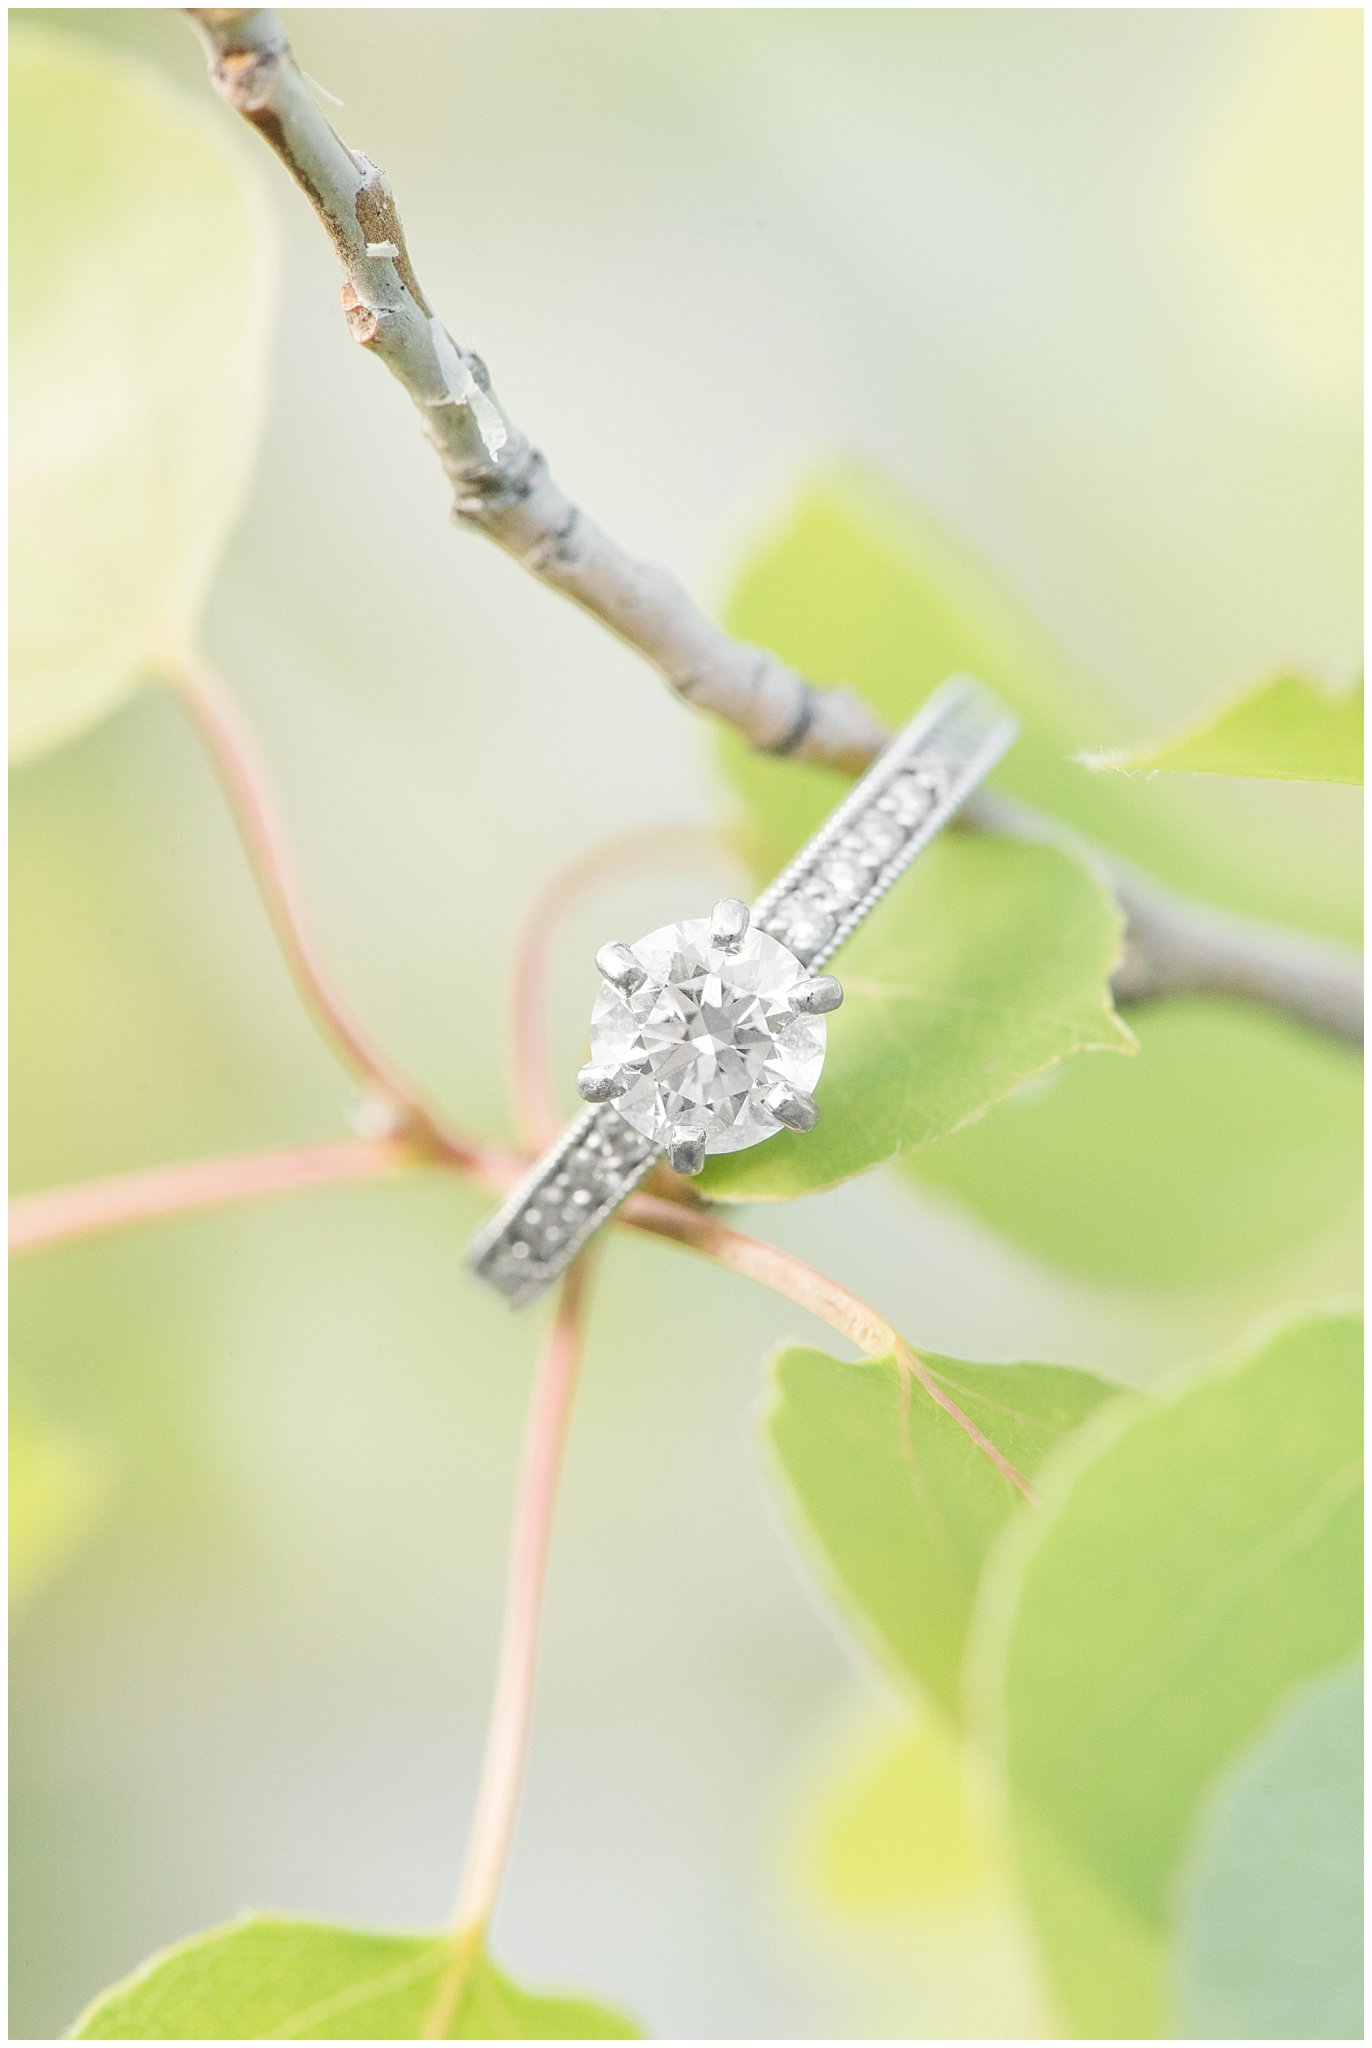 Engagement ring on aspen tree leaf | Top Utah Wedding and Couples Photos 2019 | Jessie and Dallin Photography